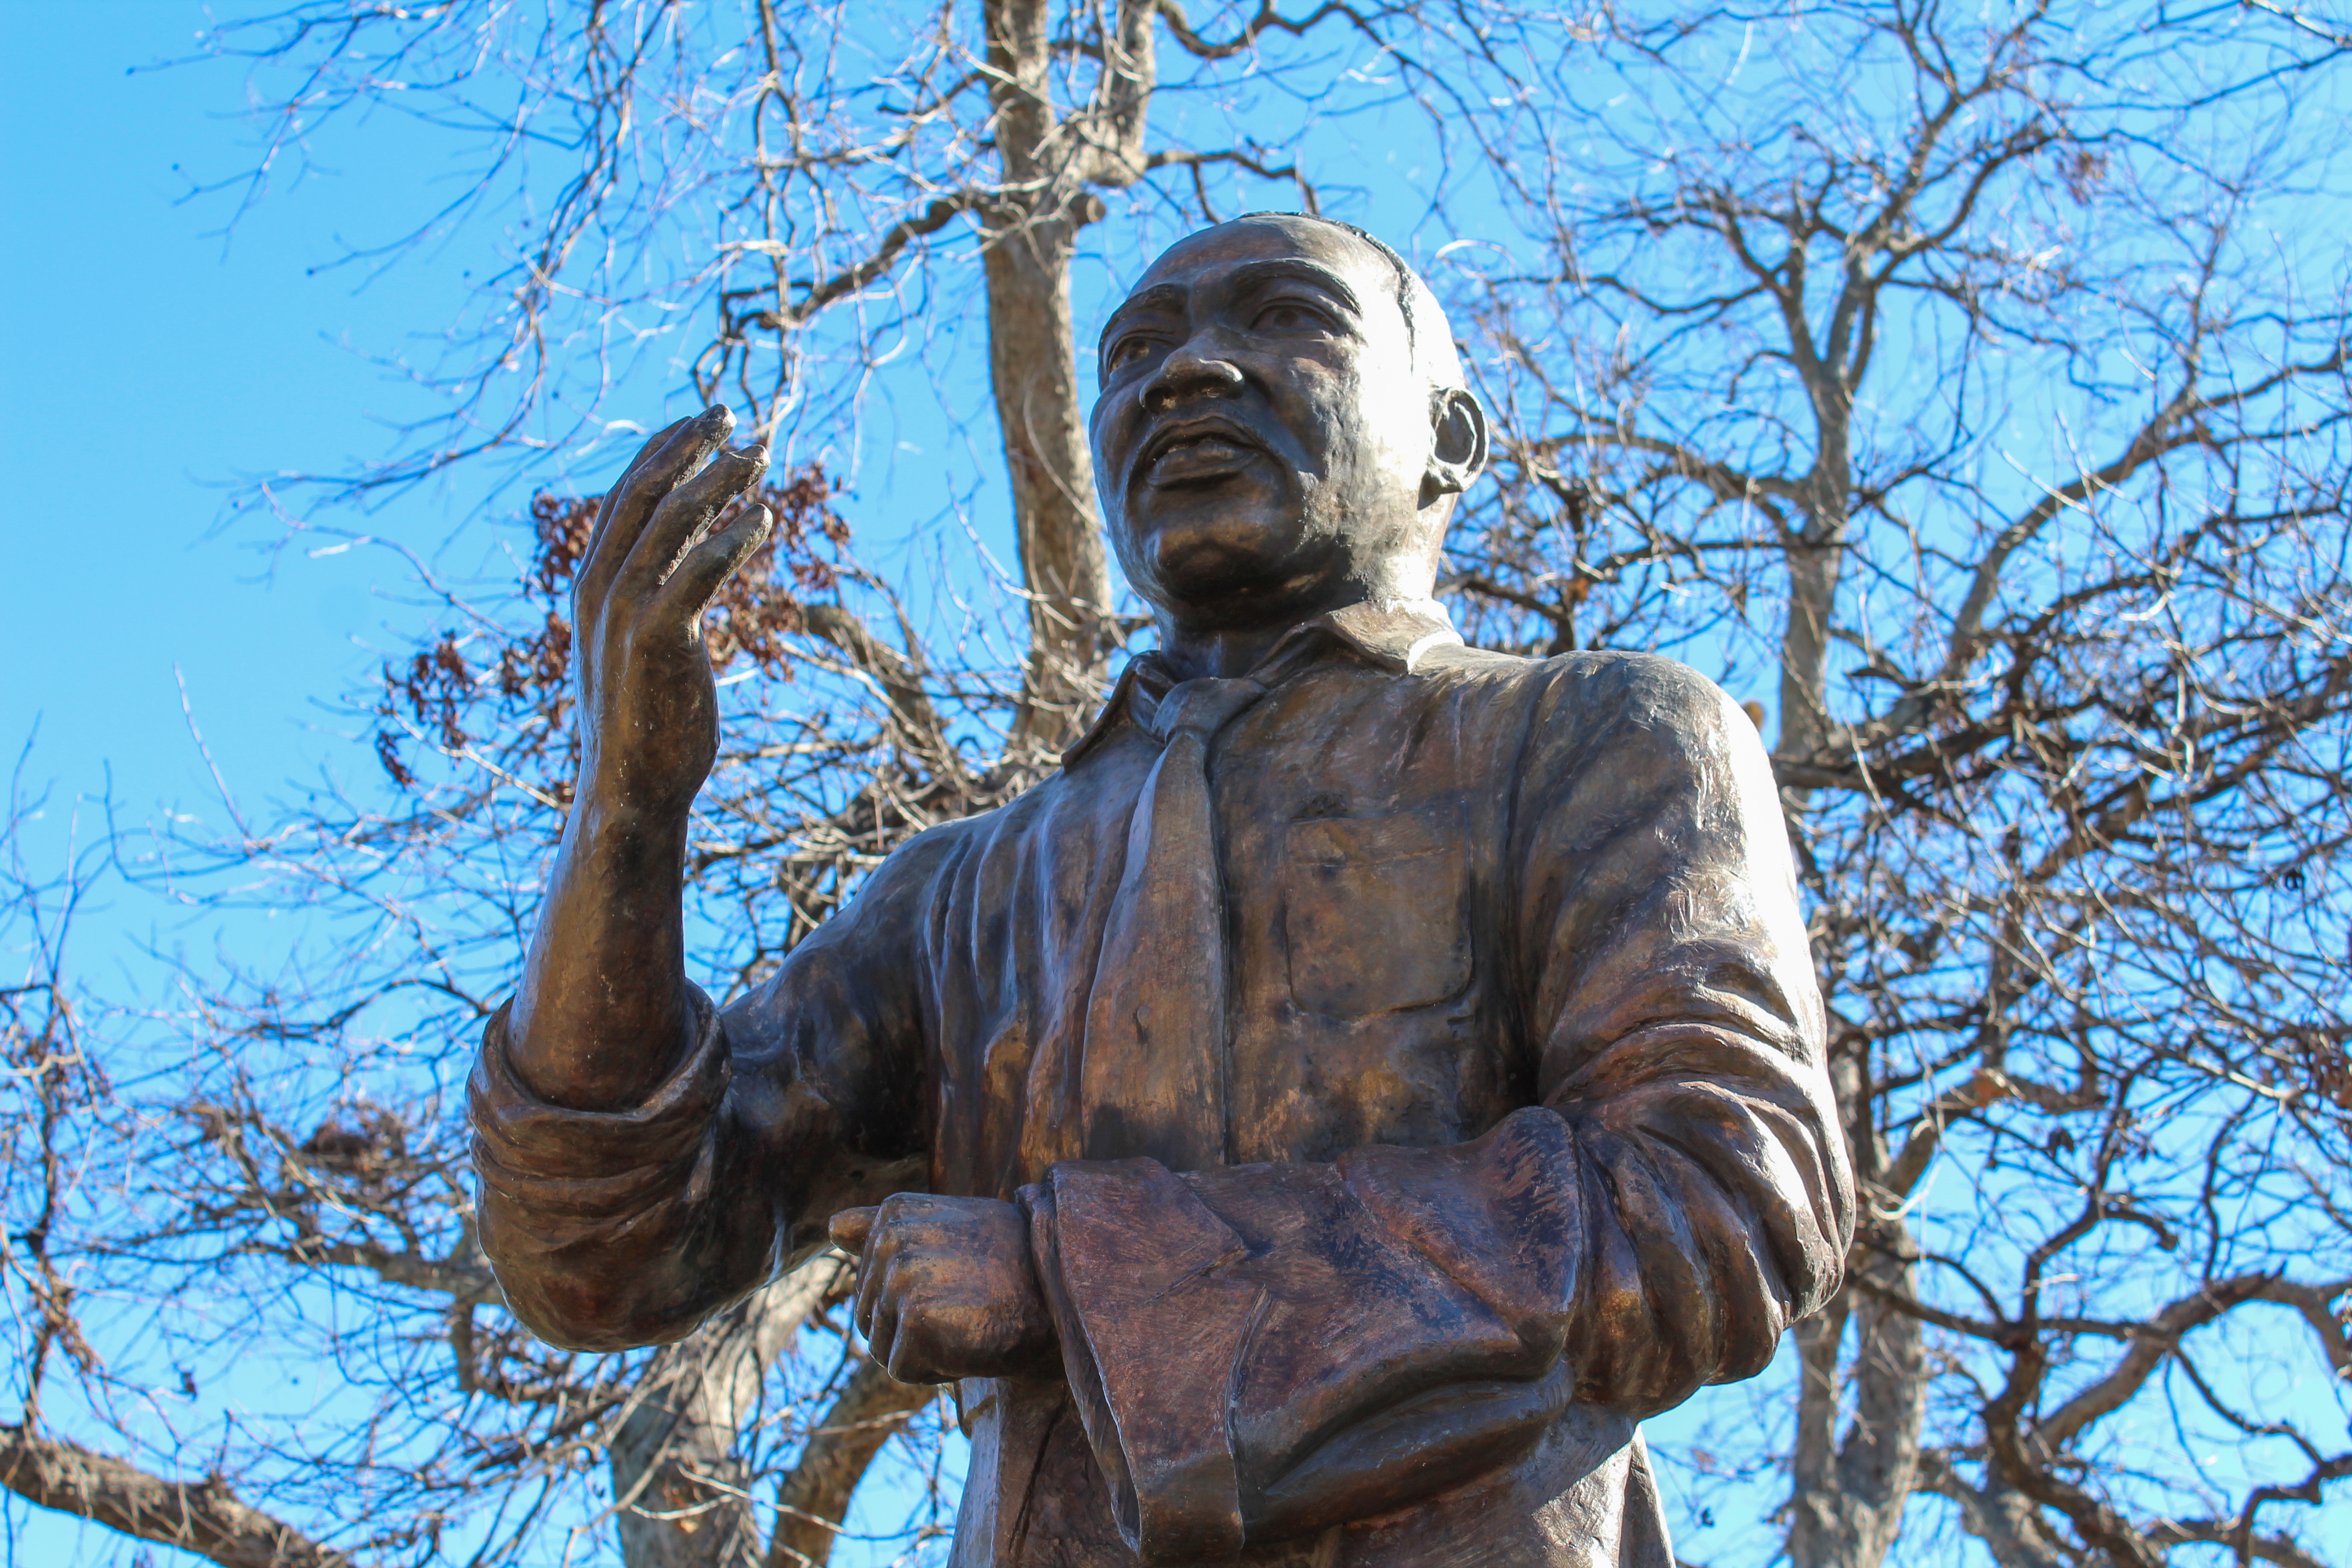 Statue of Martin Luther King Jr. stands at the Martin Luther King Jr. Community Center in Dallas, Texas.